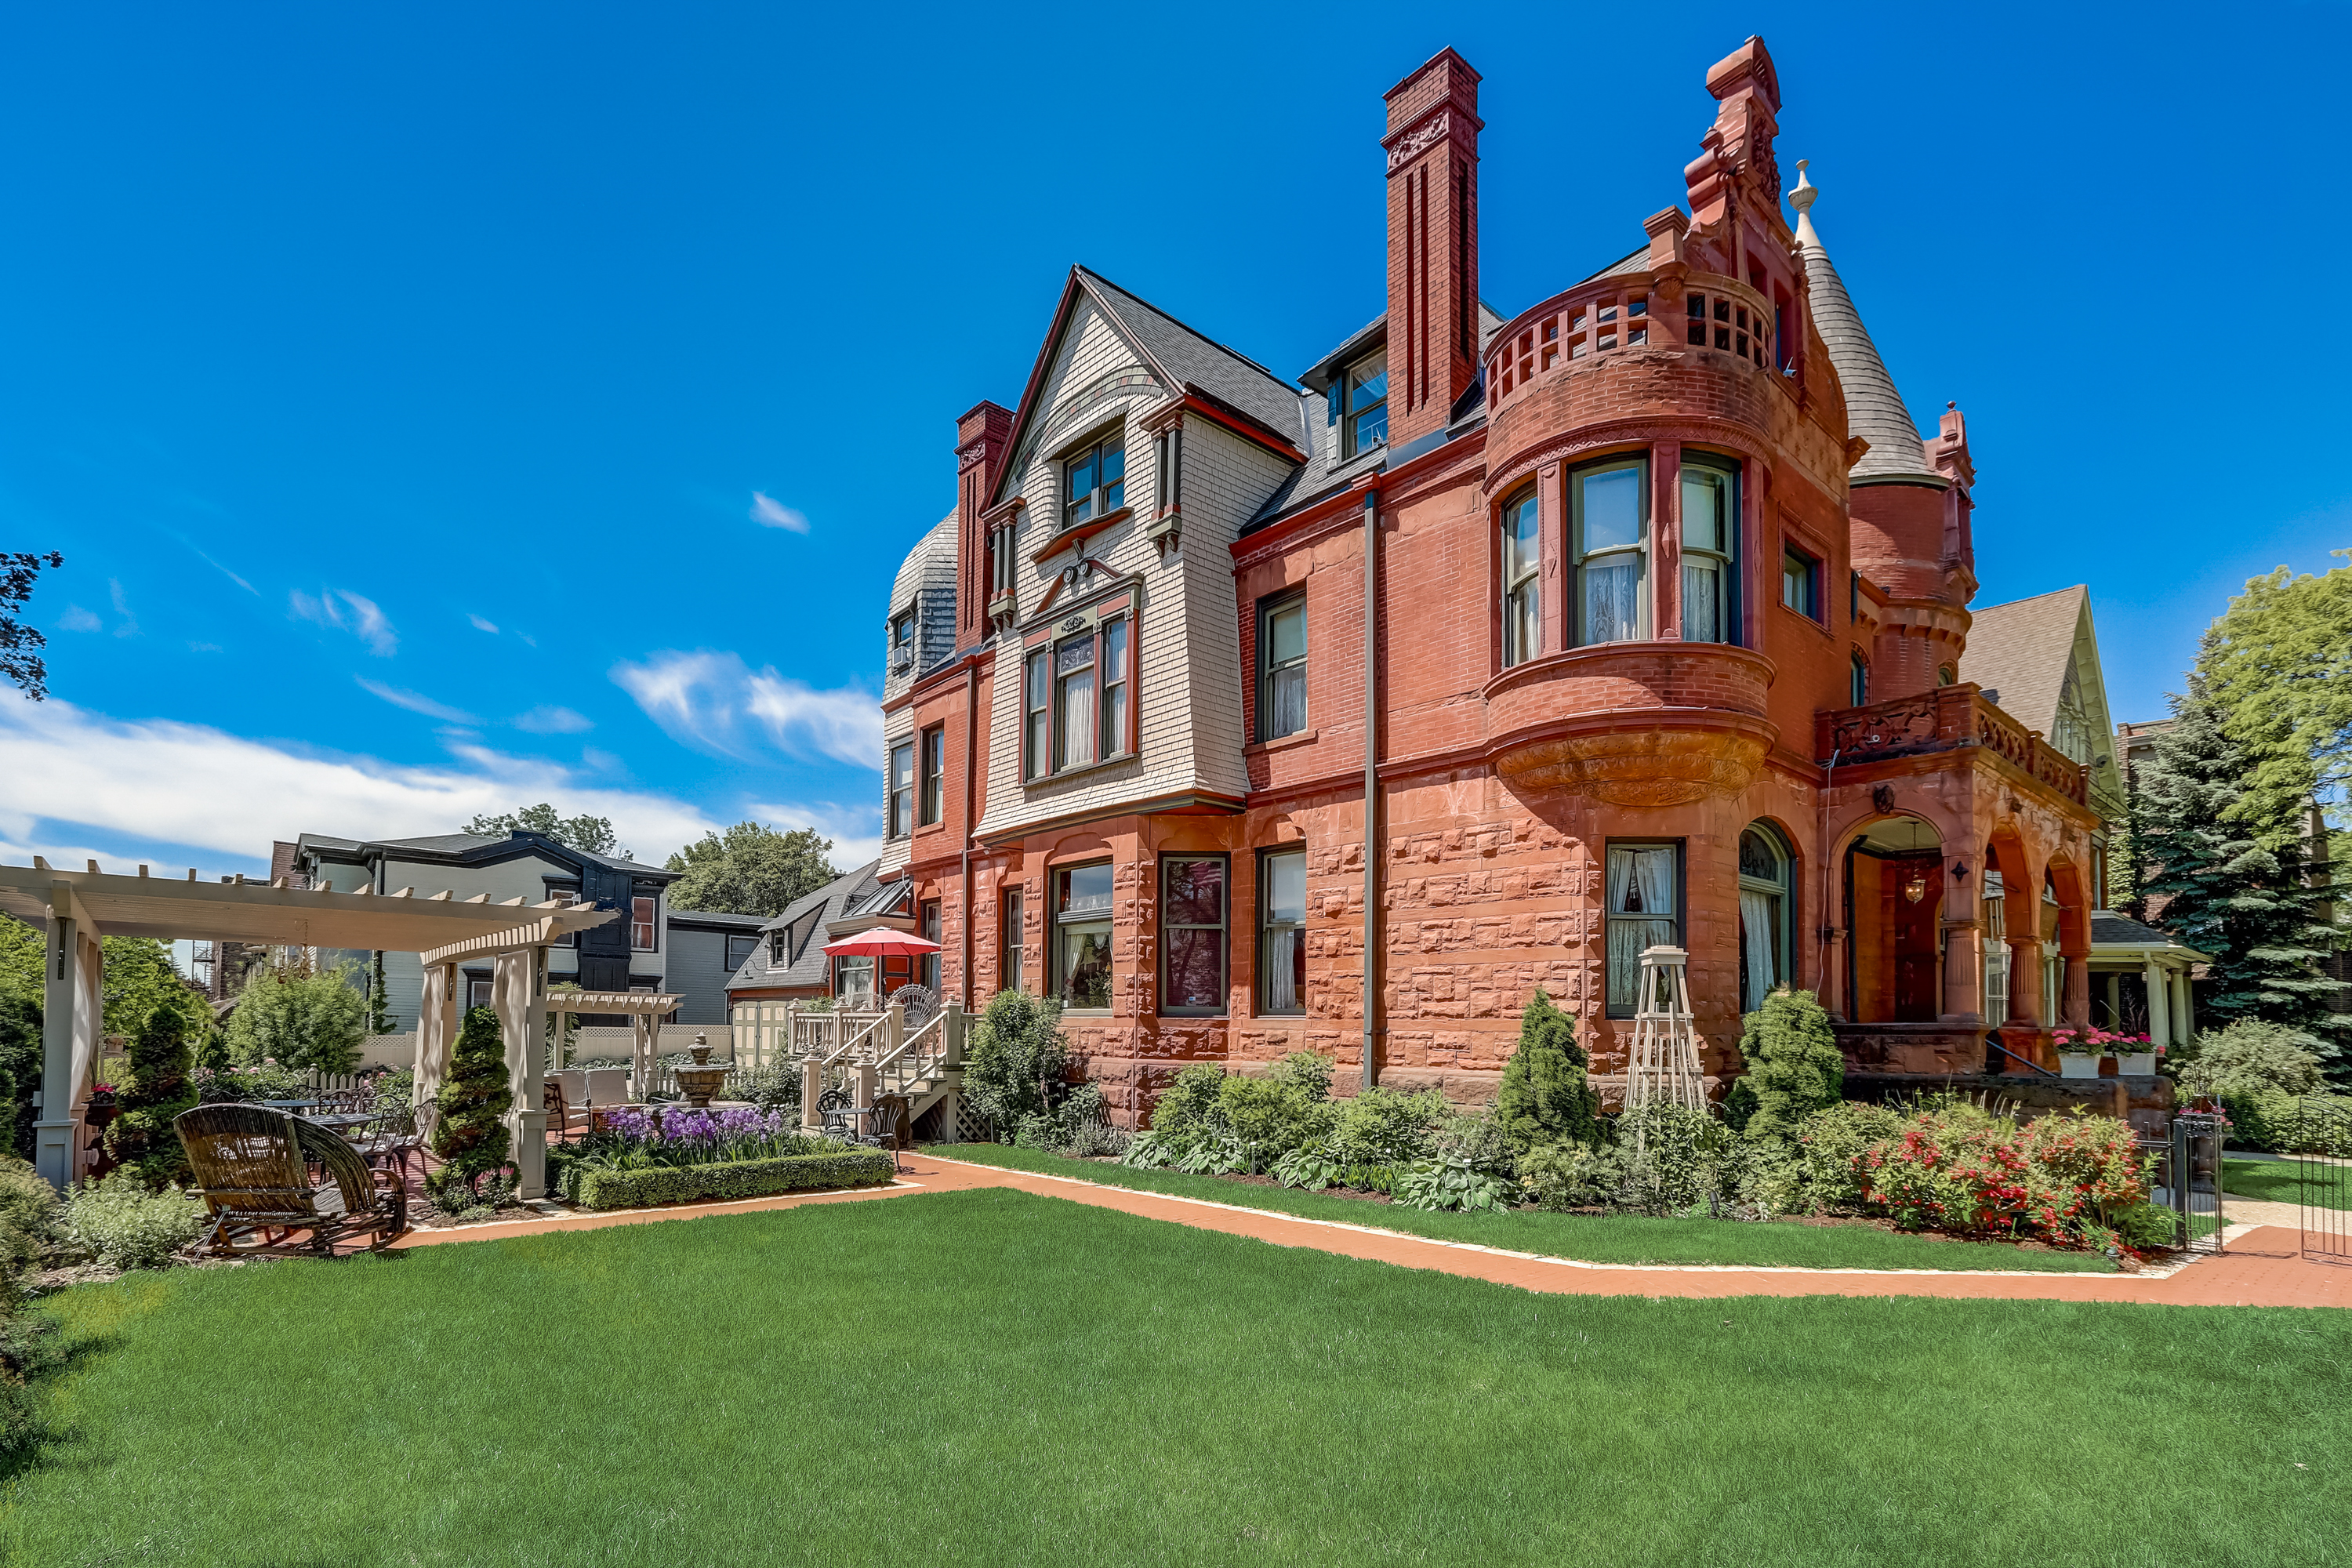  bed and breakfast inn for sale - Schuster Mansion Bed & Breakfast